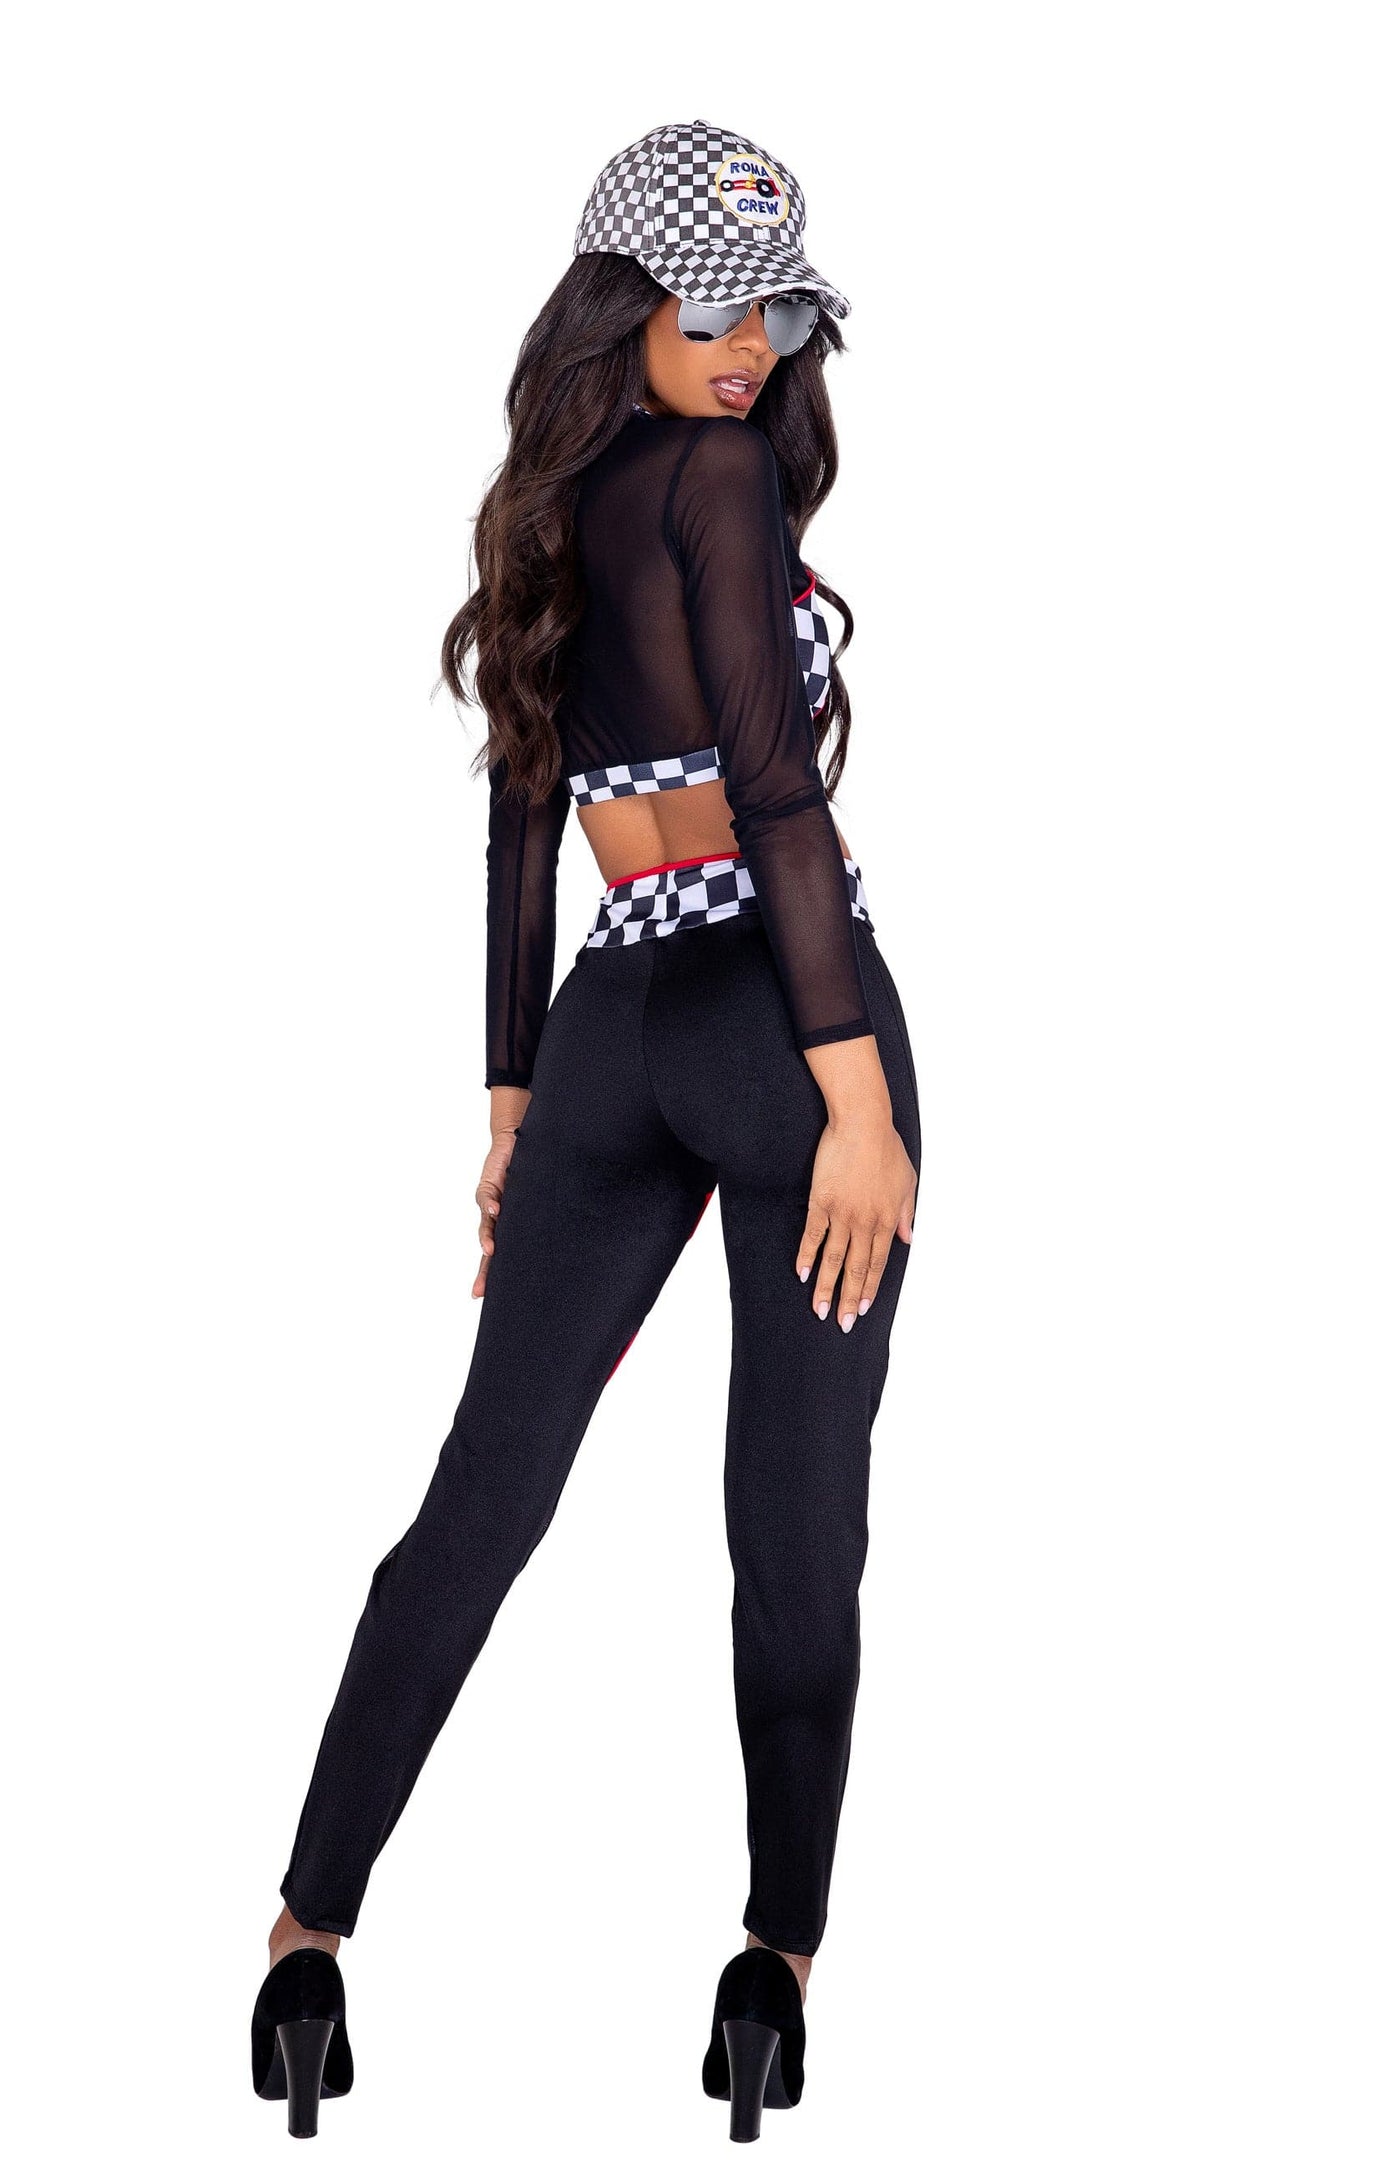 2pc. Sexy Racecar Driver Women's Costume - For Love of Lingerie